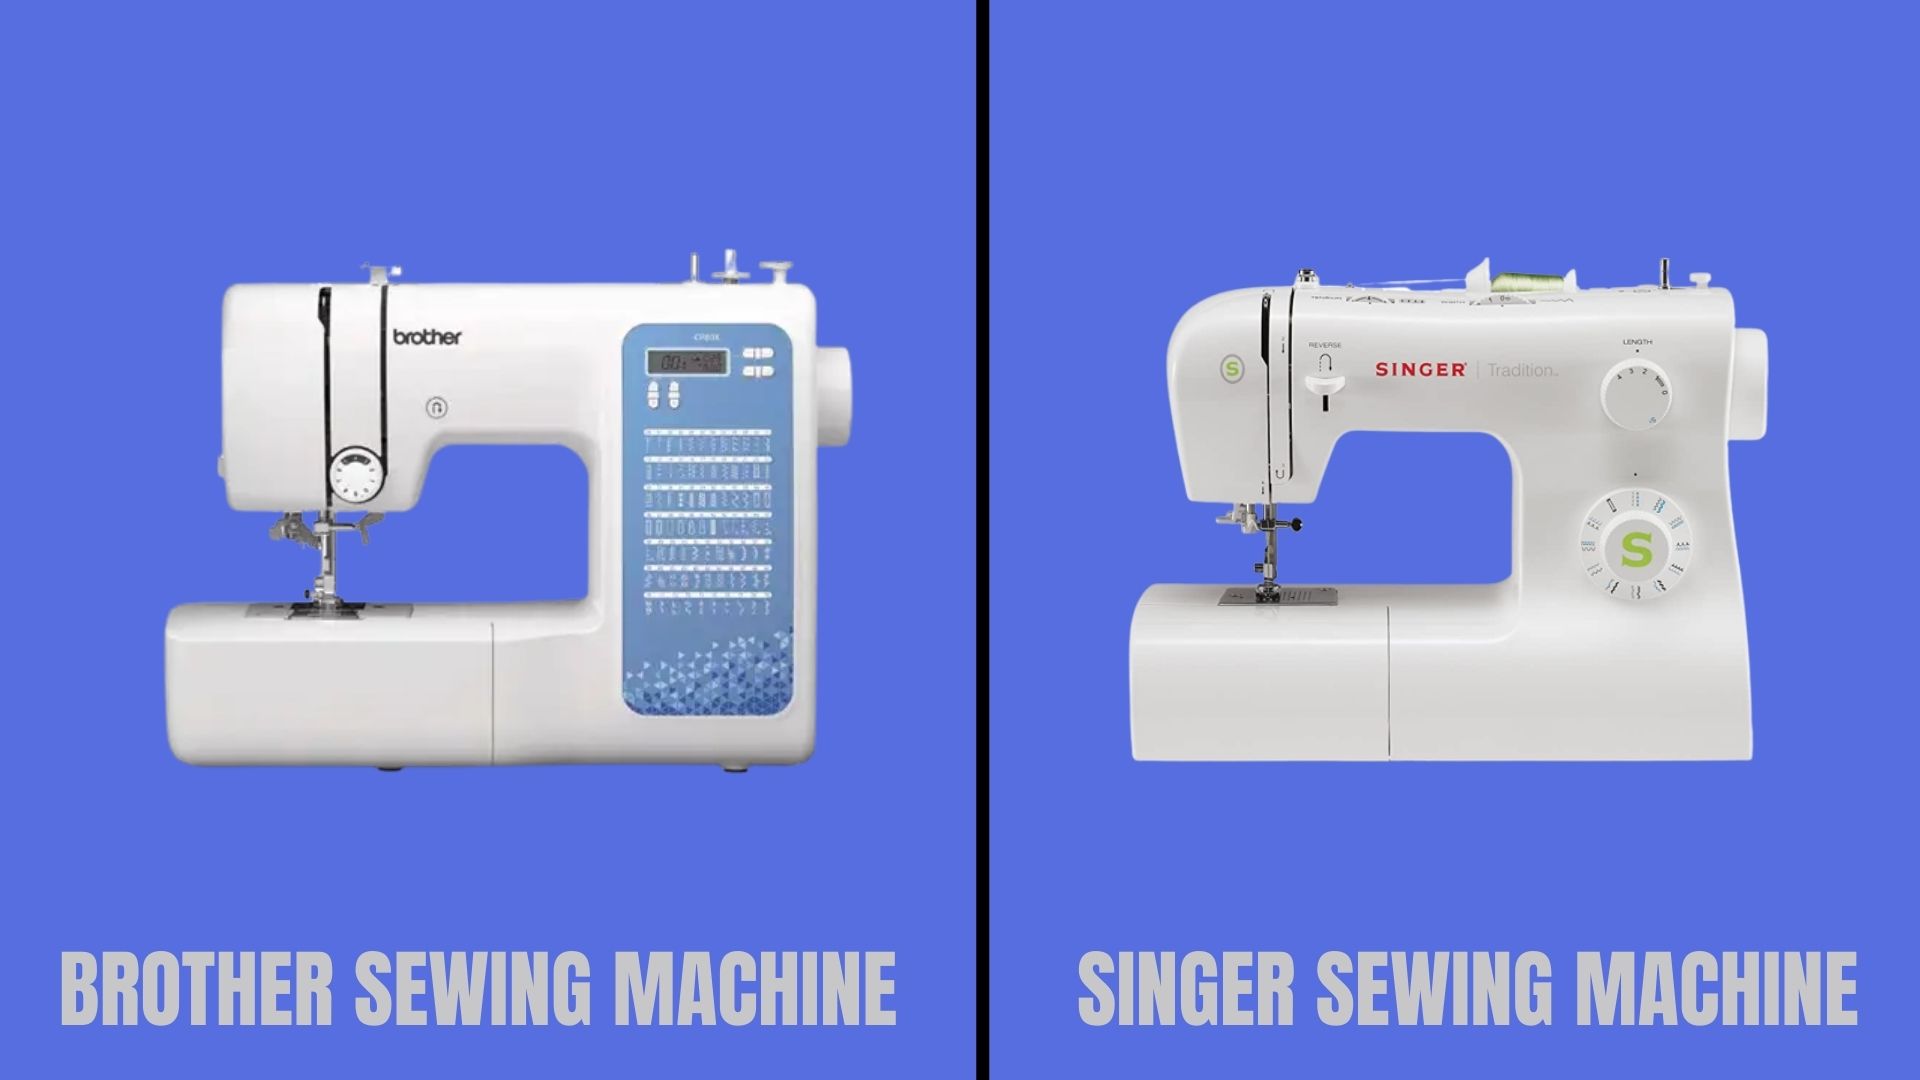 In this article, we'll take an in-depth look at Brother vs Singer sewing machines, comparing features, performance, and price.